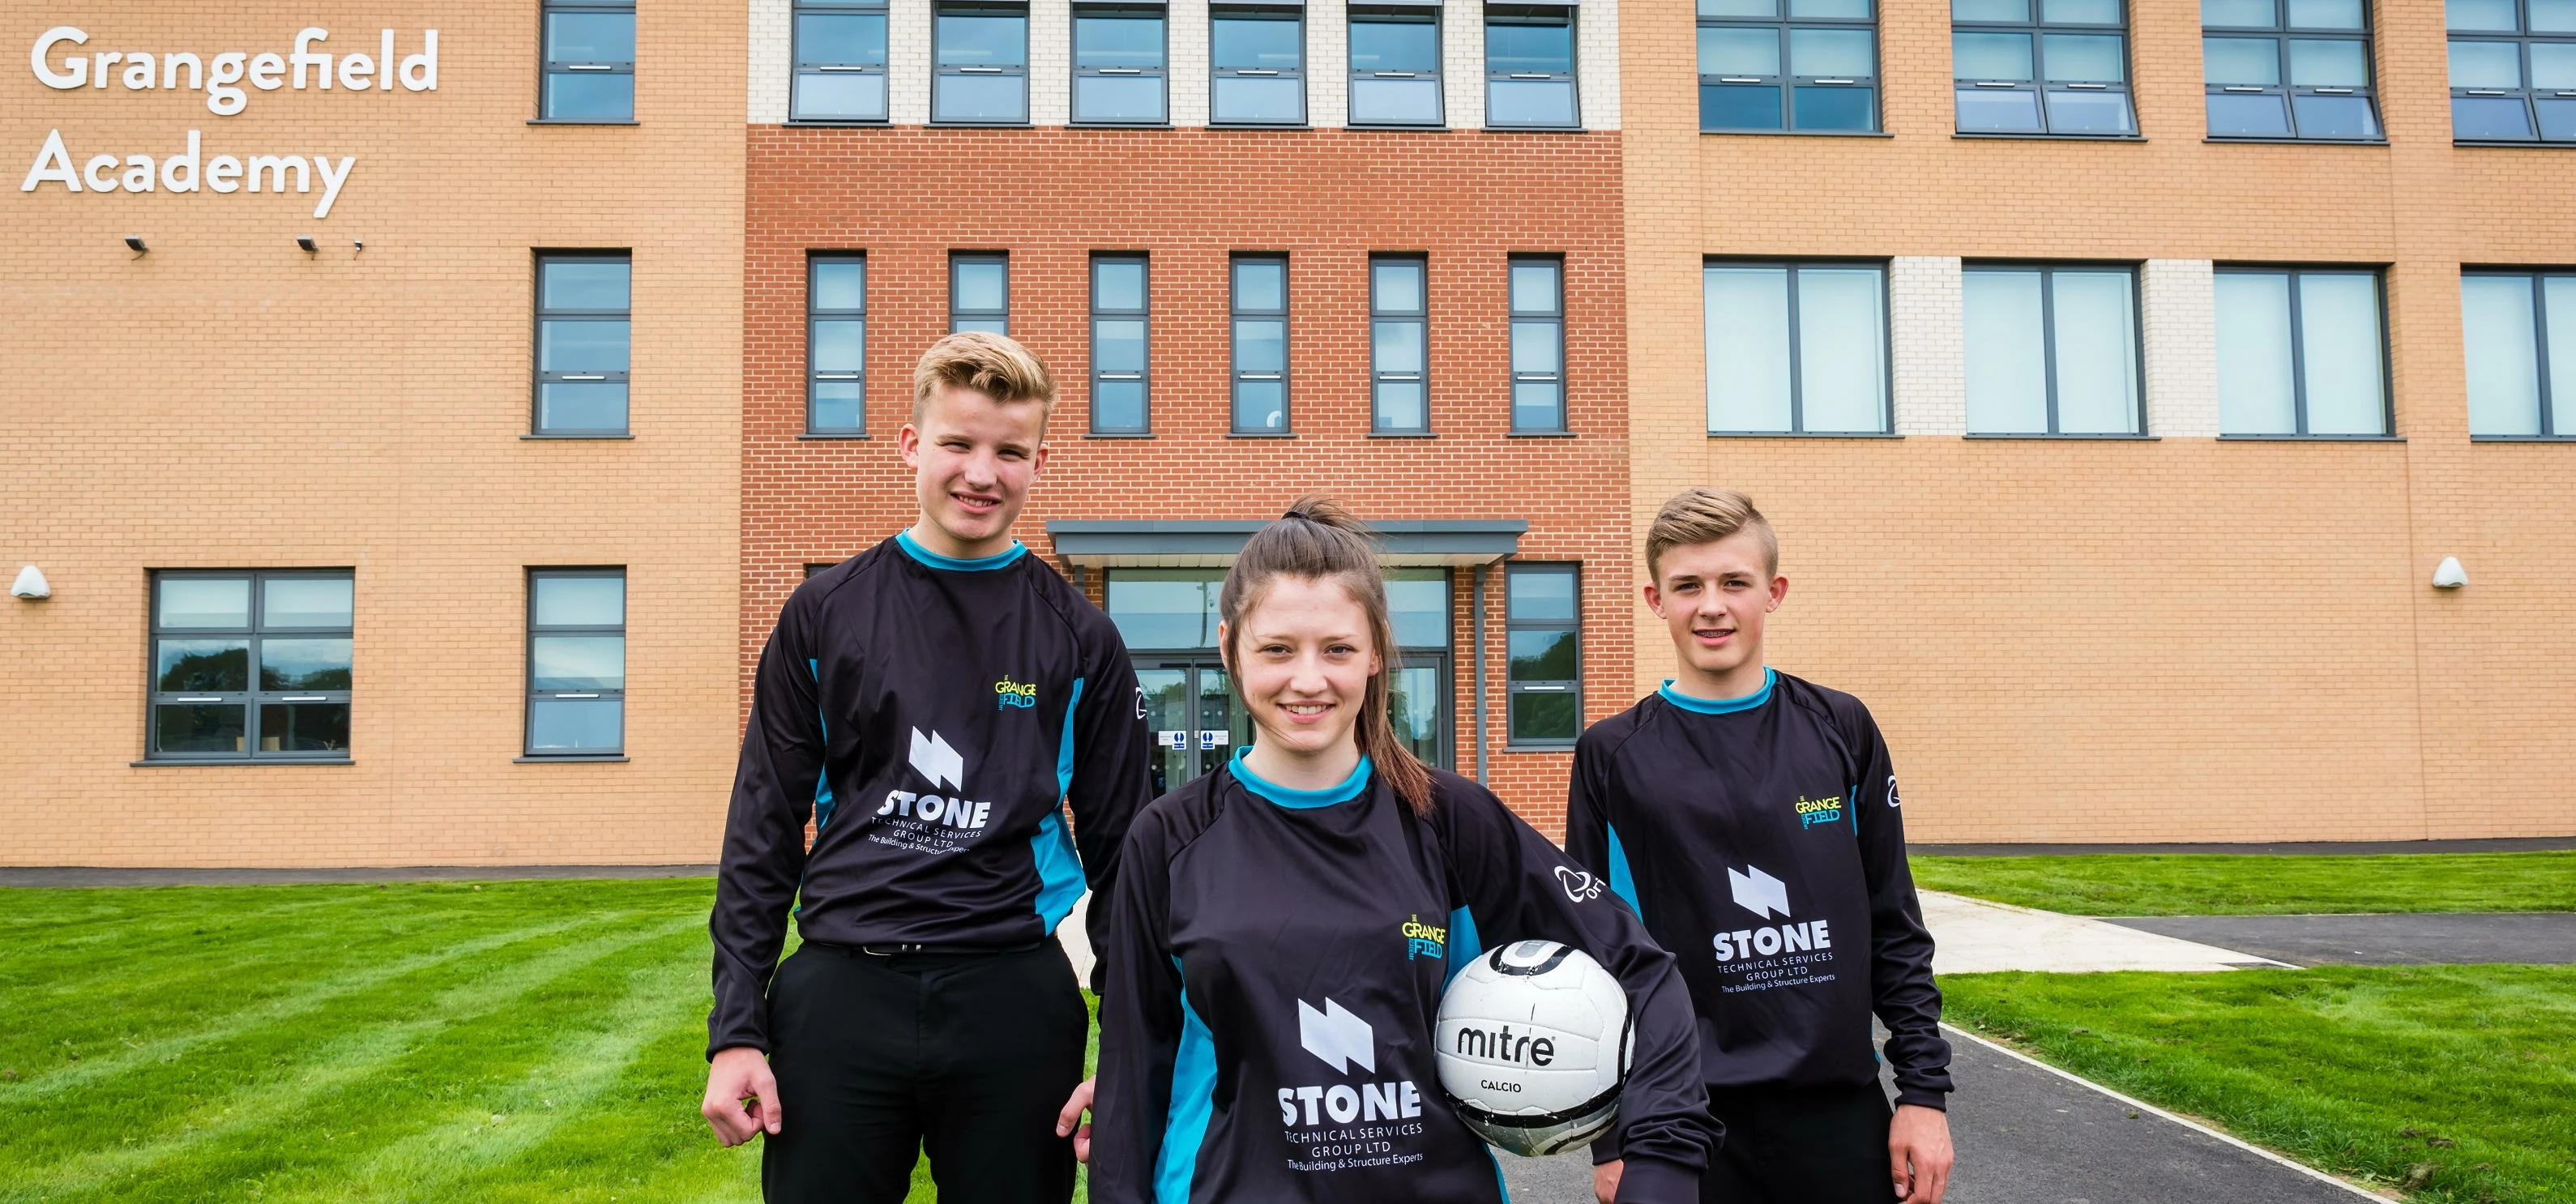 Alex McArthur, Lara Hebner and Curtis Larsen from the Grangefield Academy in their new kit